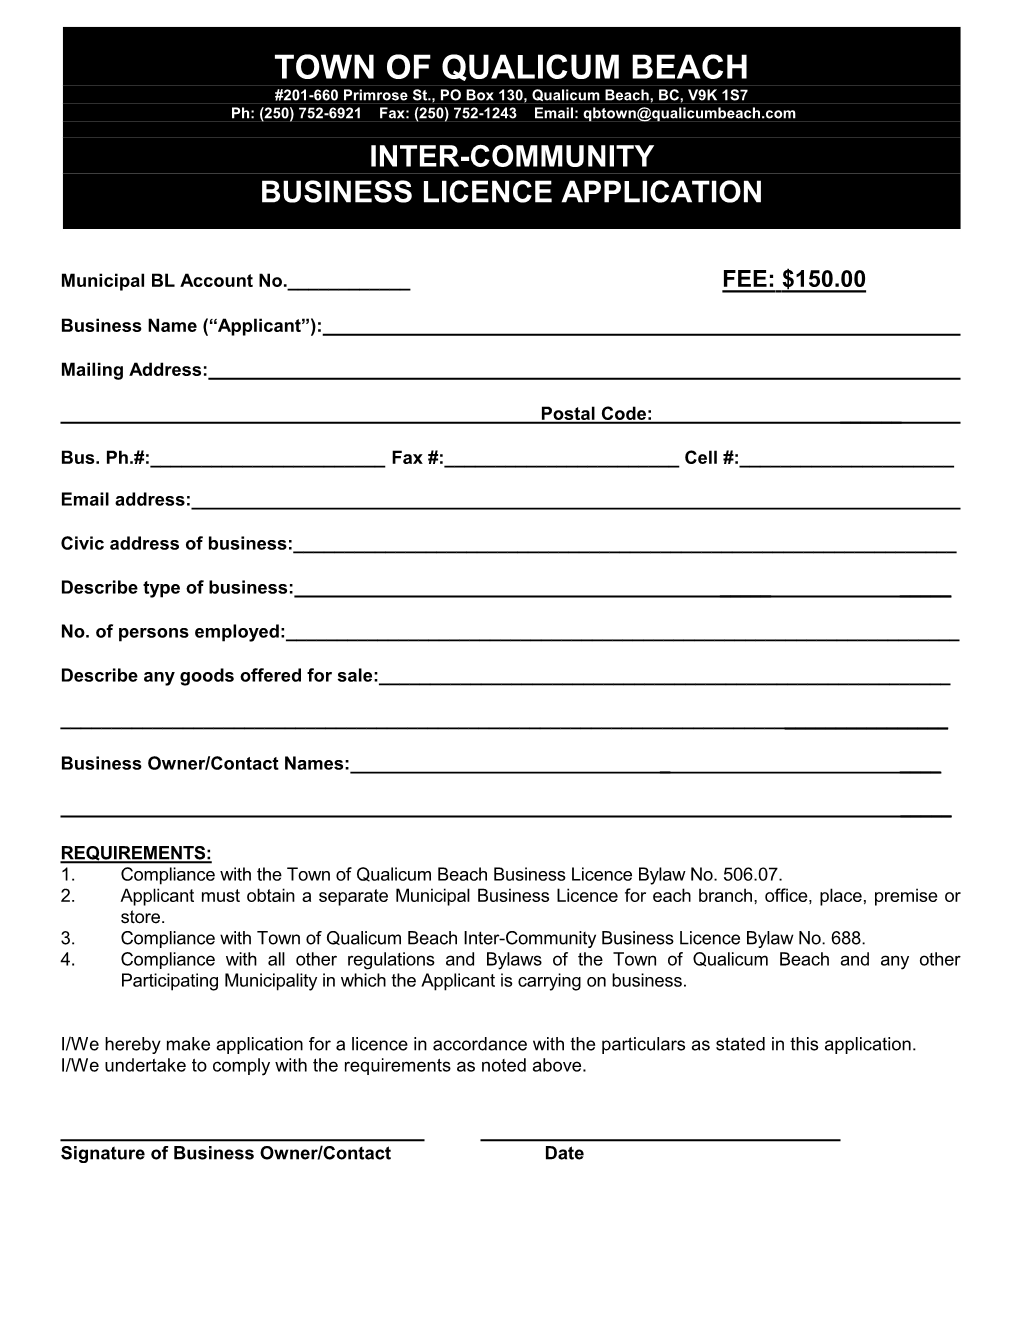 Inter-Community Business Licence Application